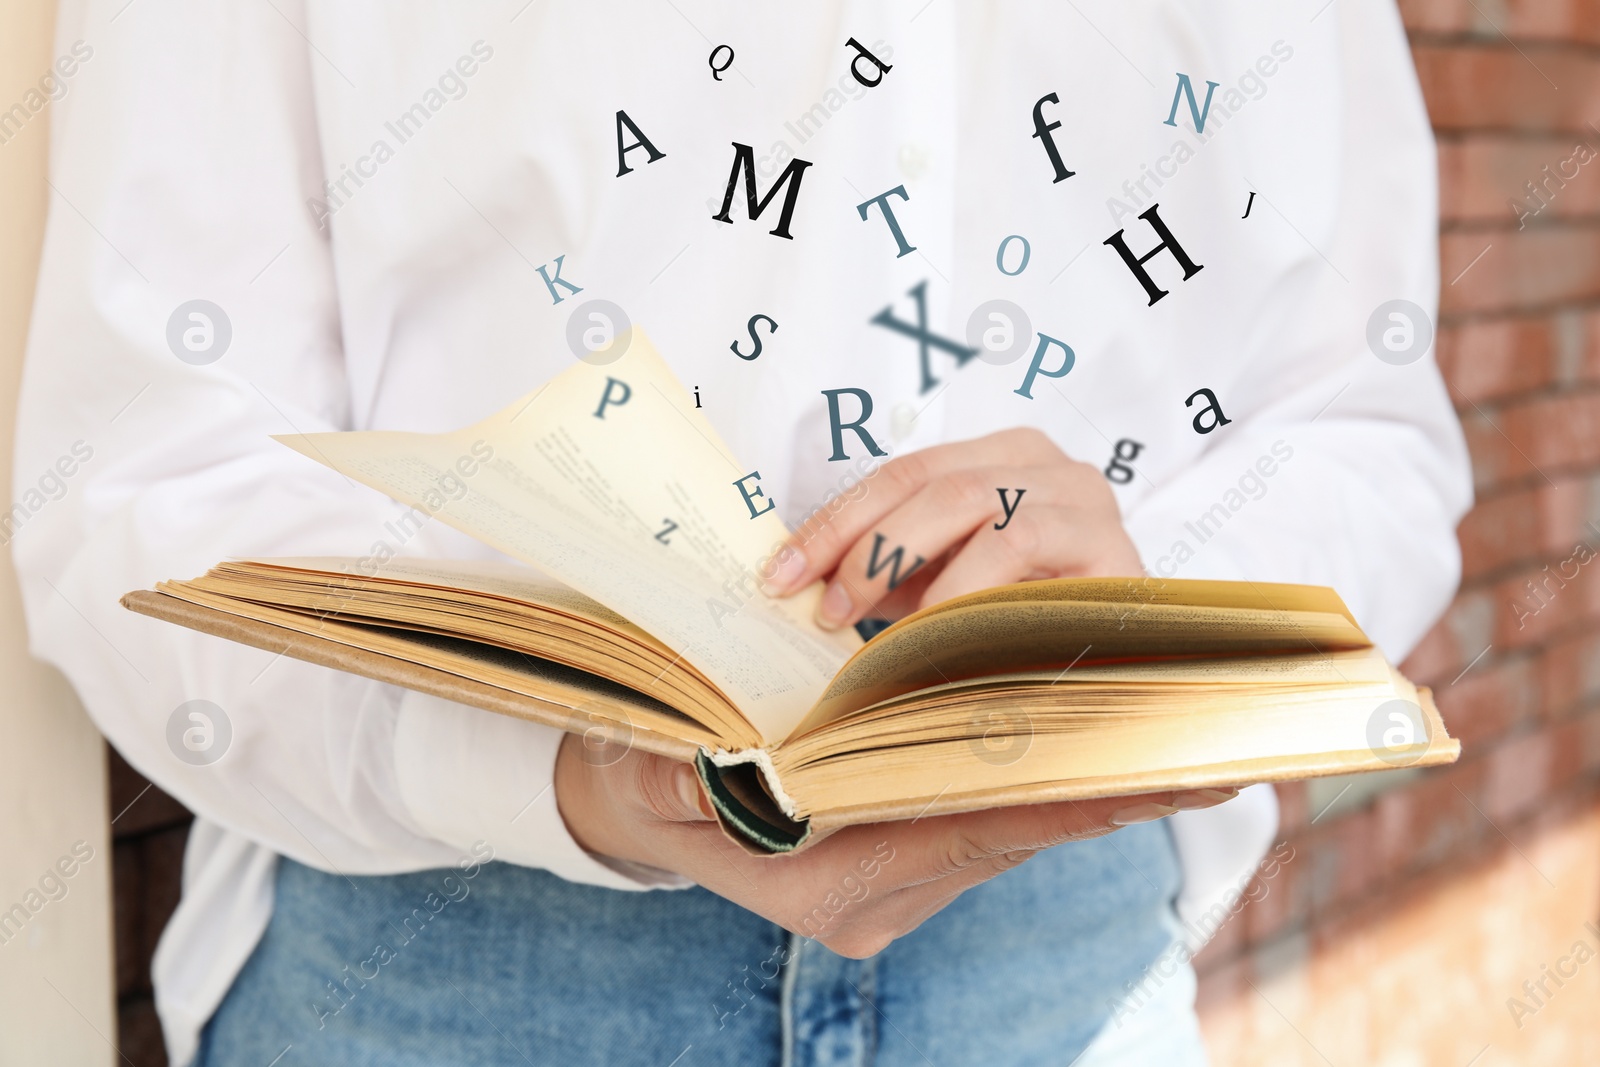 Image of Woman reading book with letters flying over it outdoors, closeup